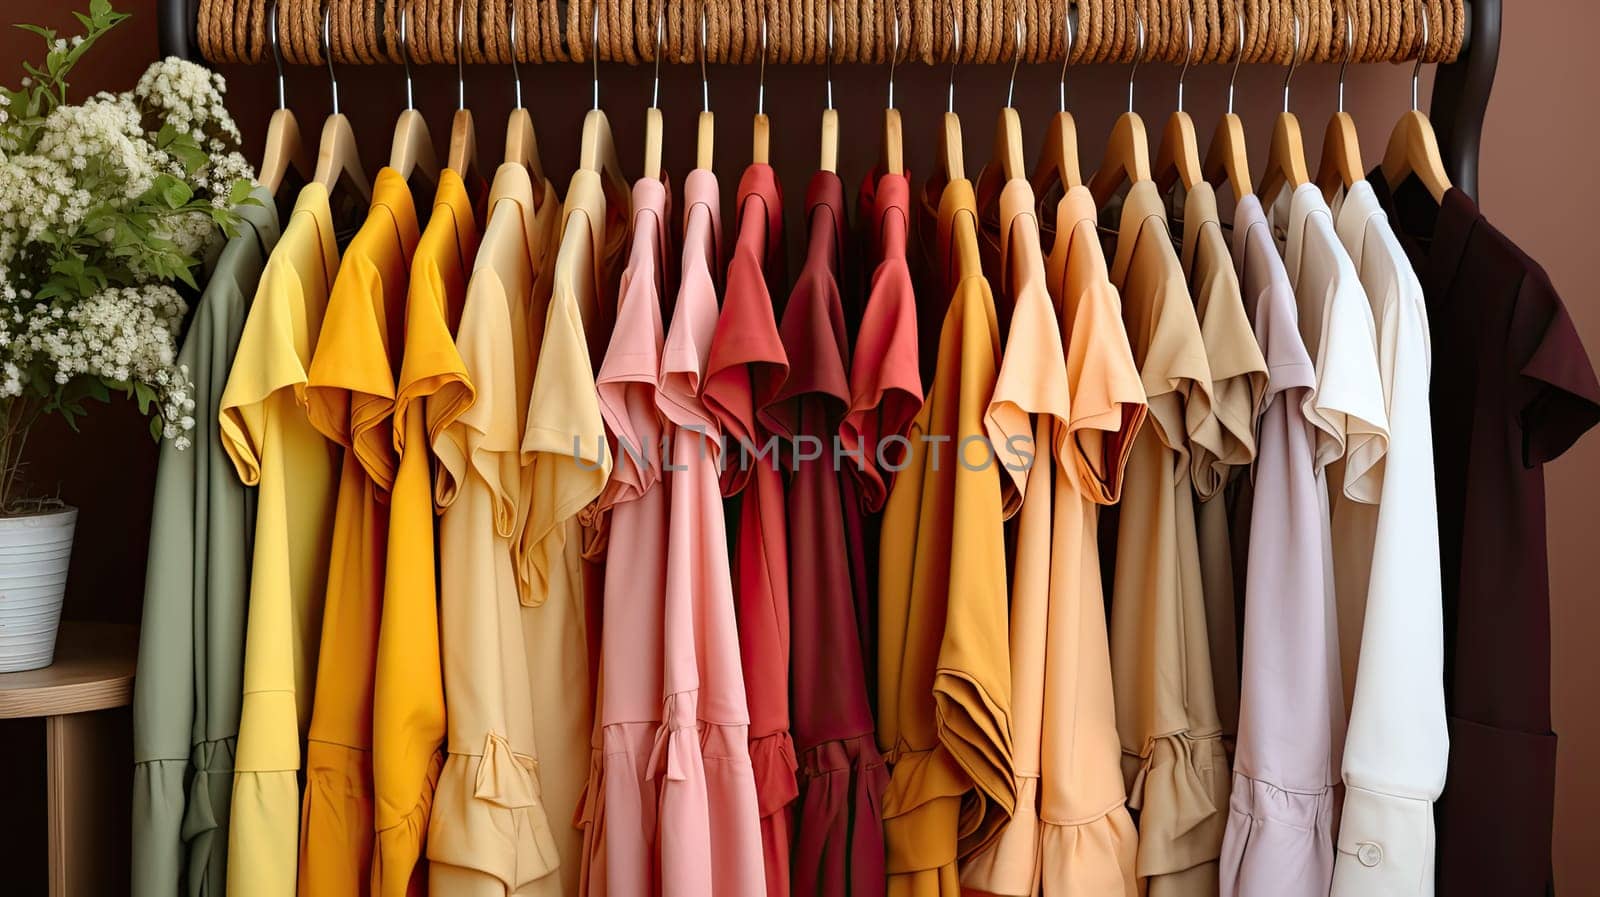 Summer closet, dresses and shirts on hangers. Creative concept of women's by AnatoliiFoto